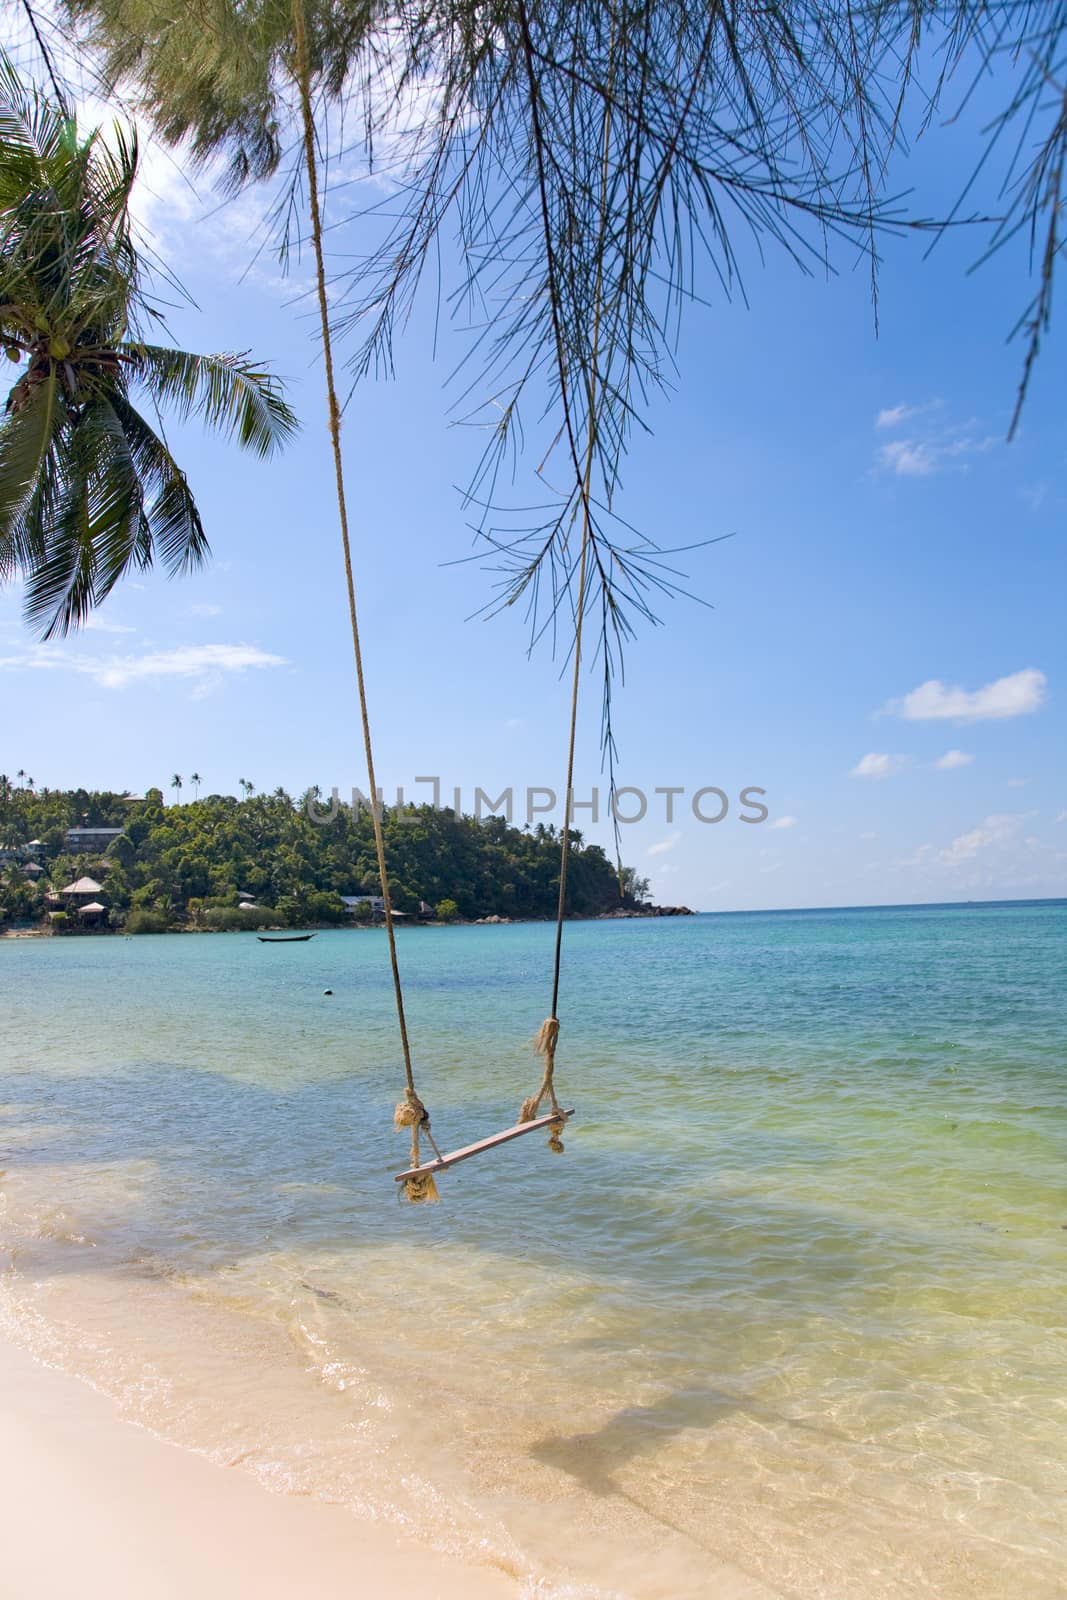 View of tropical beach with  Old  Swing Tied to anTree in Koh Panangan